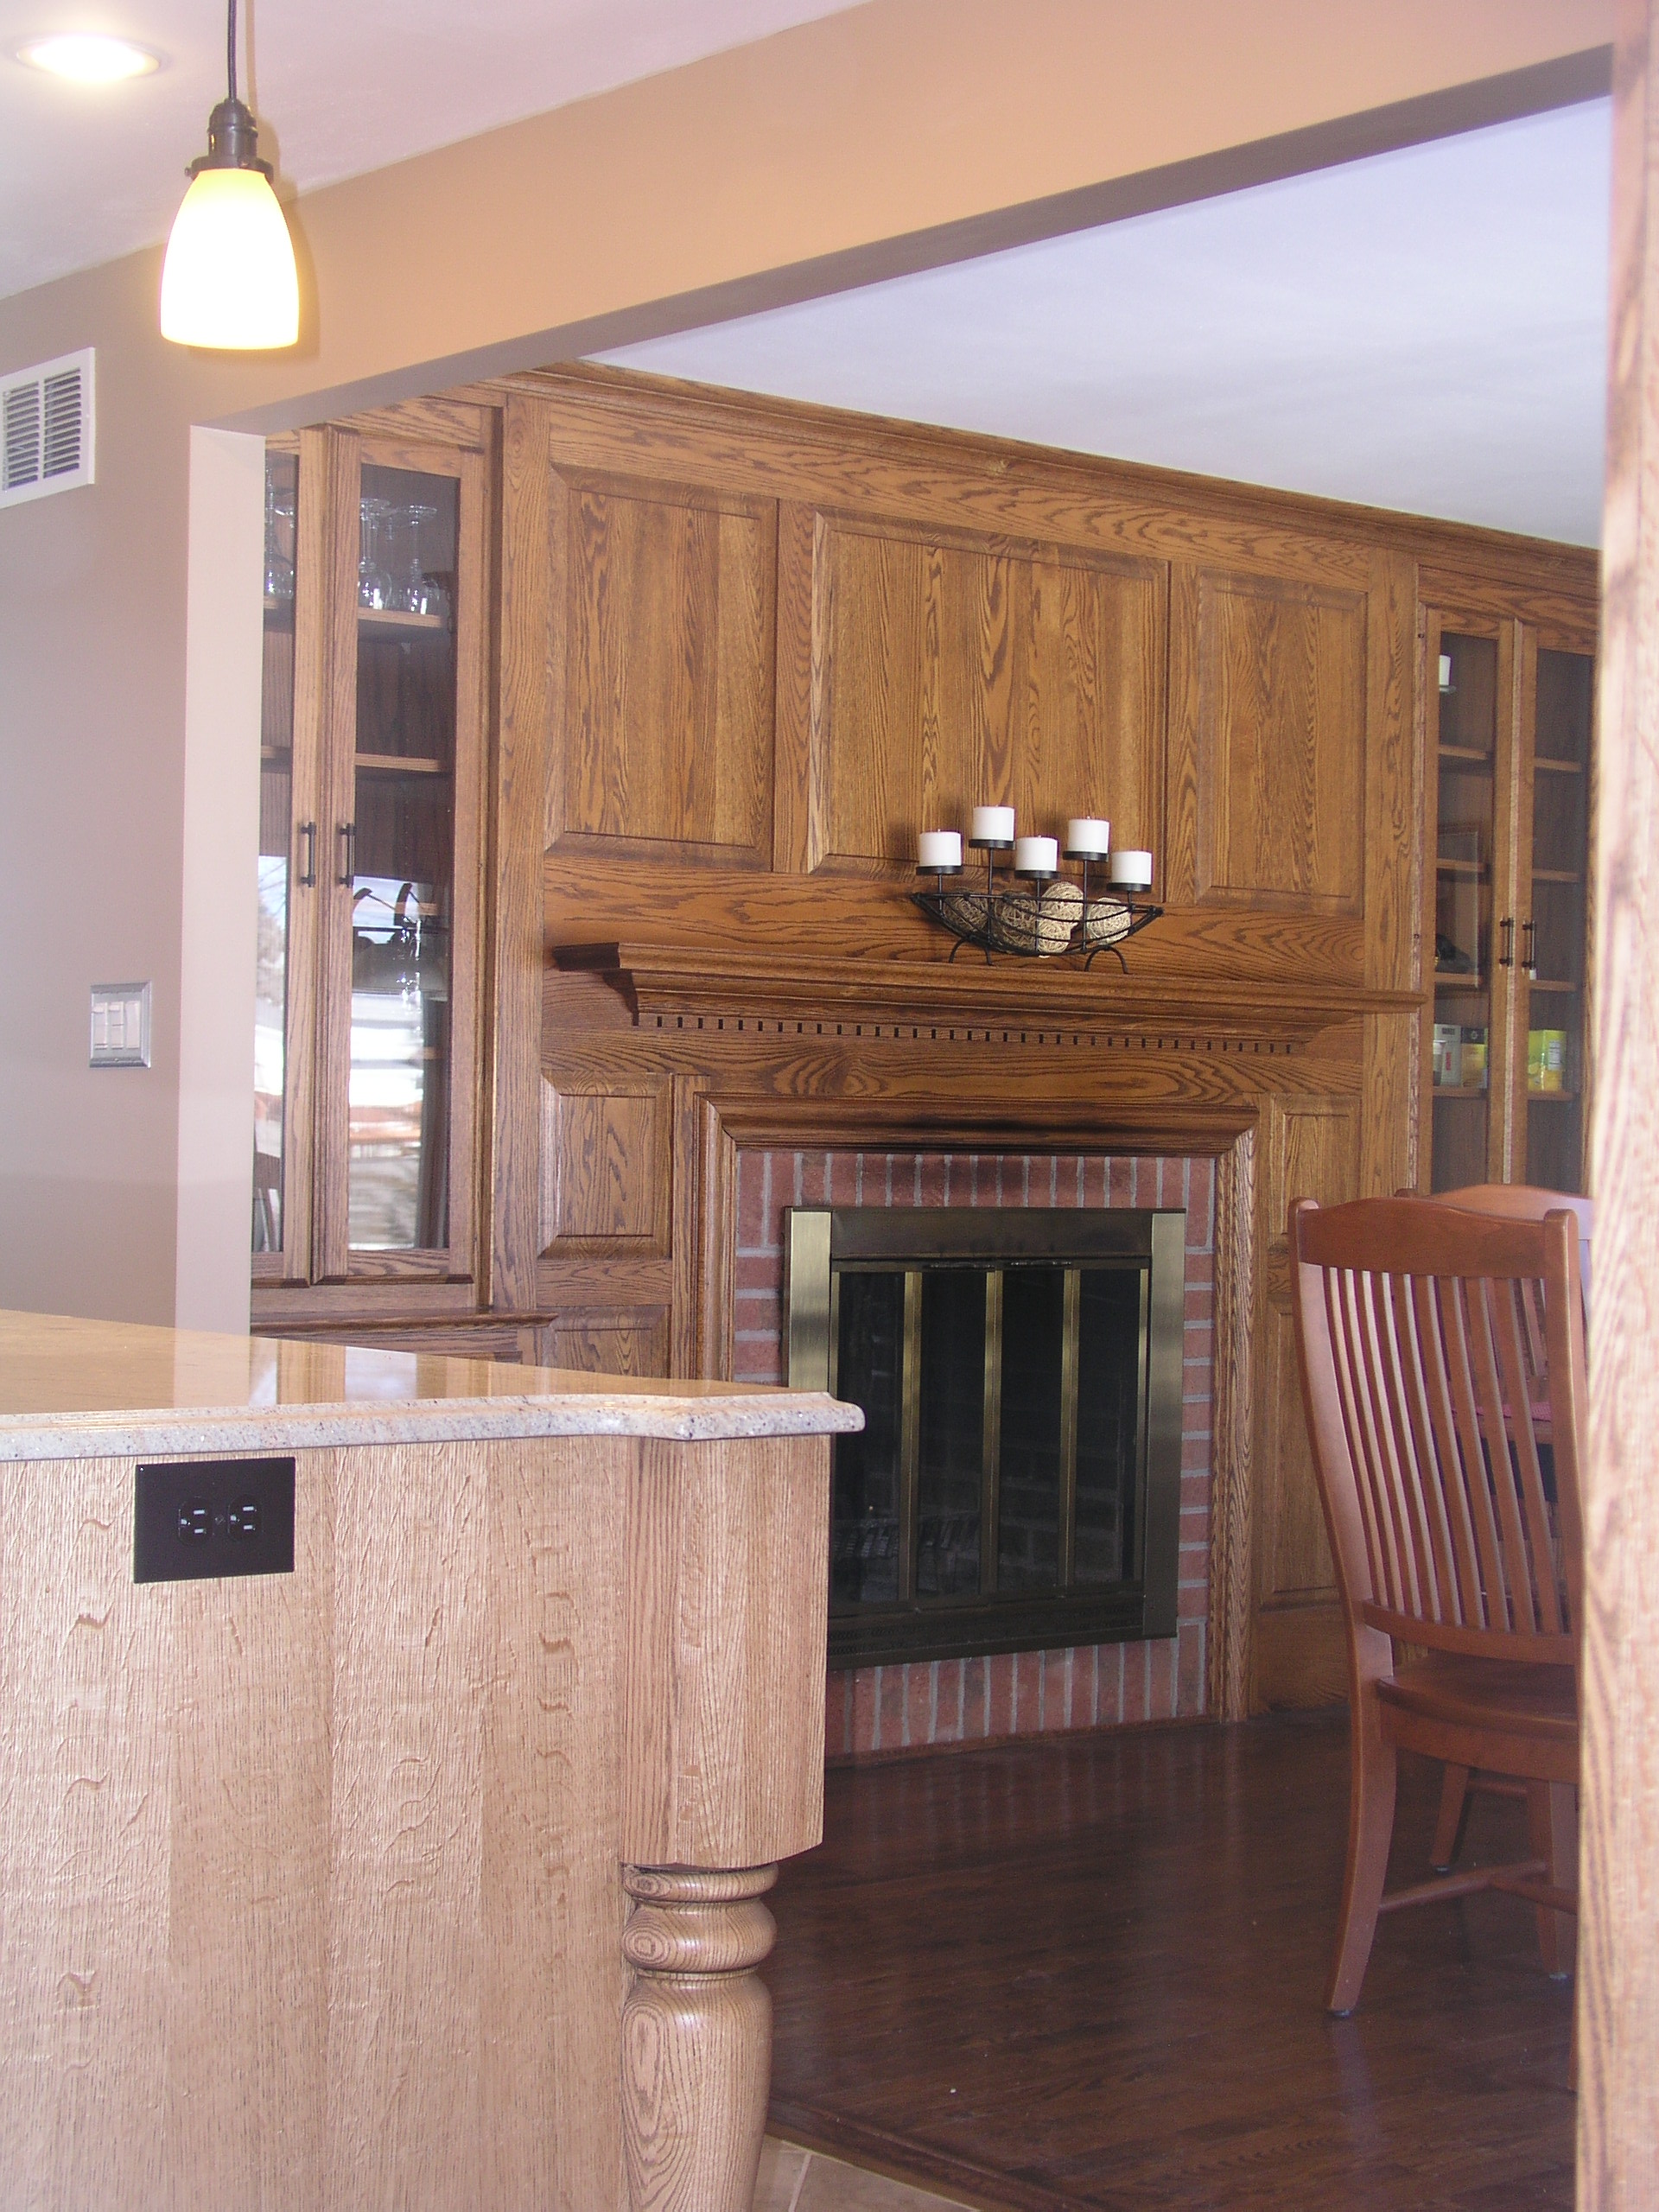 Kitchen Design Oak : Traditional Kitchen Remodel with New Oak Cabinets